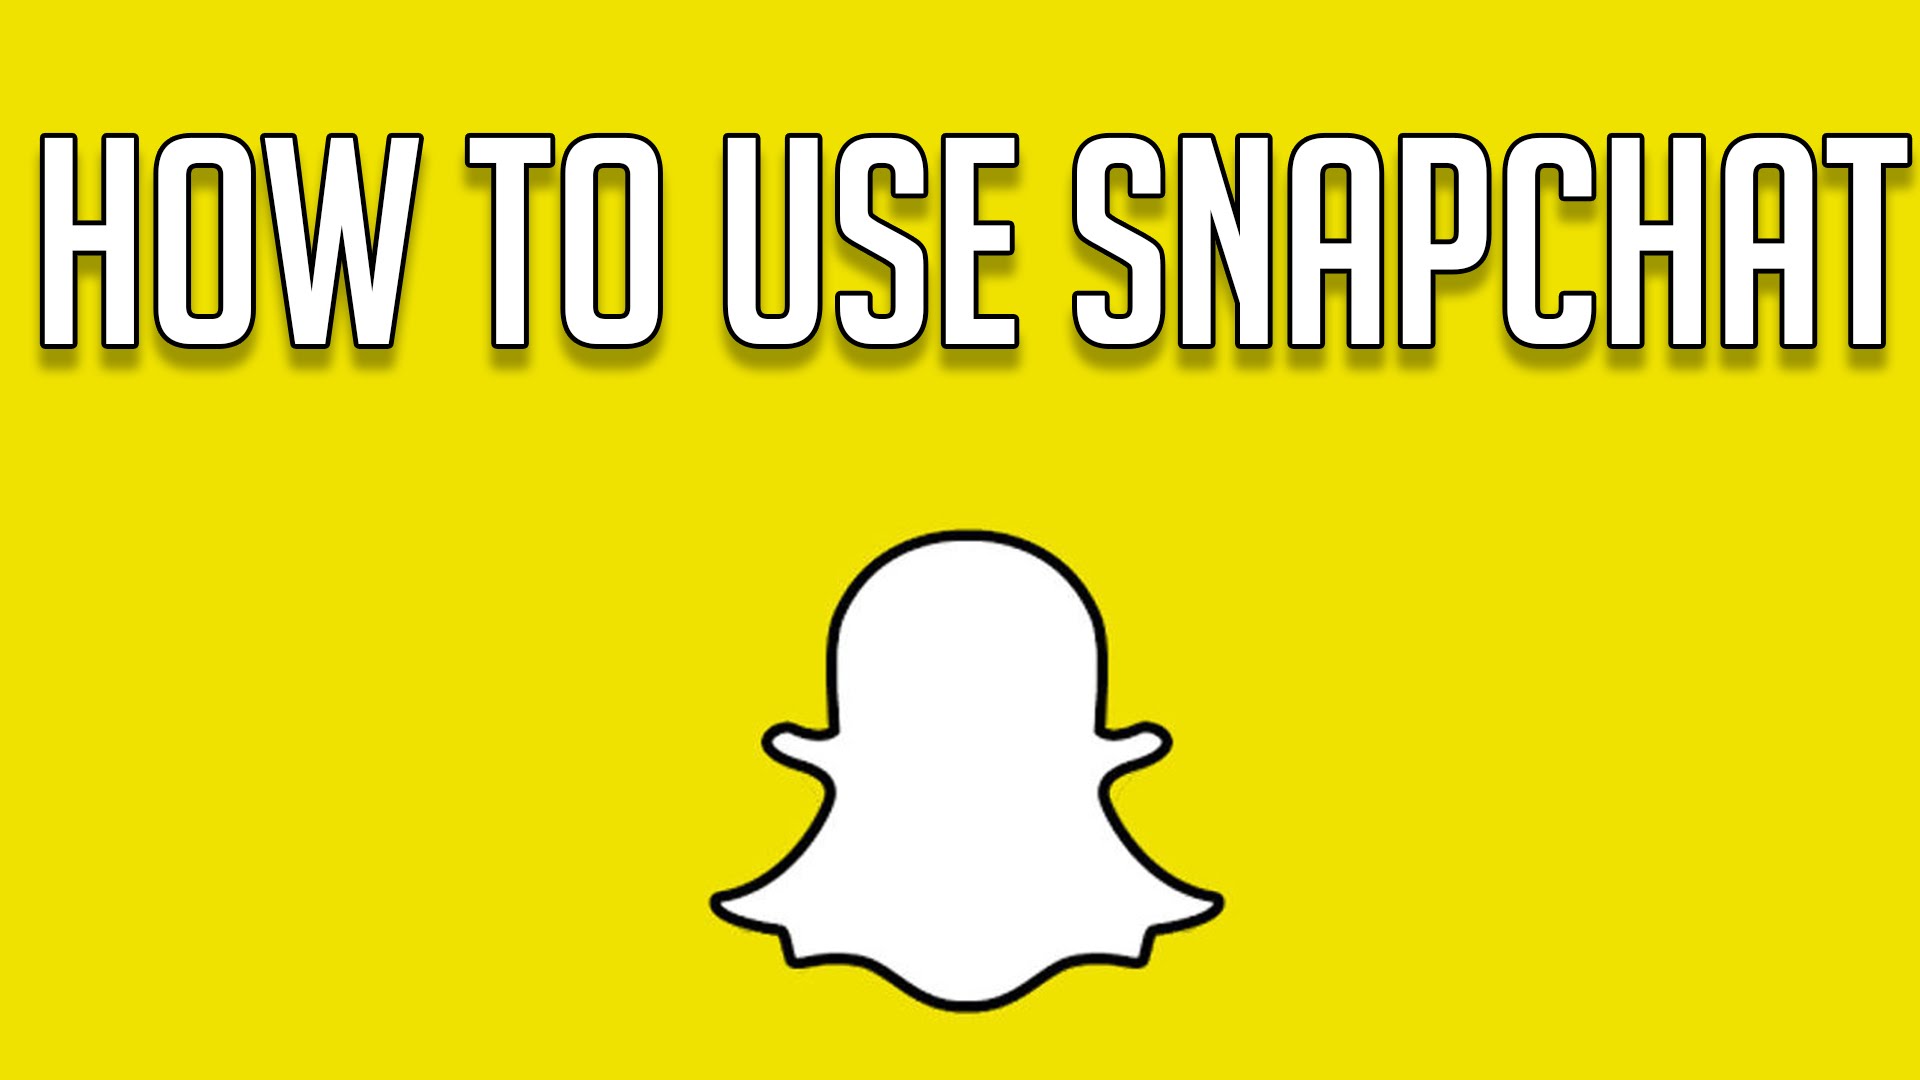 HOW TO USE SNAPCHAT FOR BEGINNERS - Snapchat Tricks and Tips - YouTube